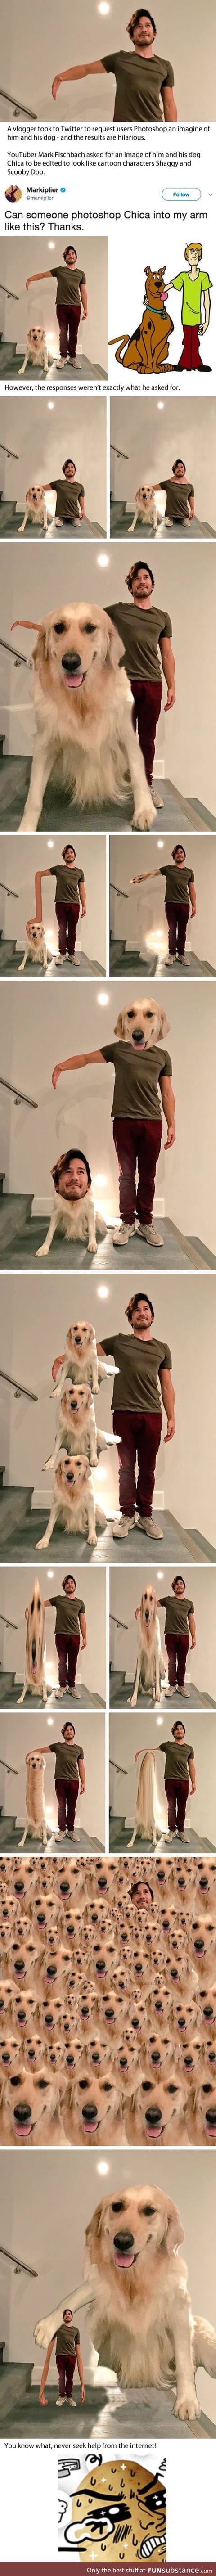 Mark Fischbach sparks photoshop battle after he asks for edit on pic of him and dog